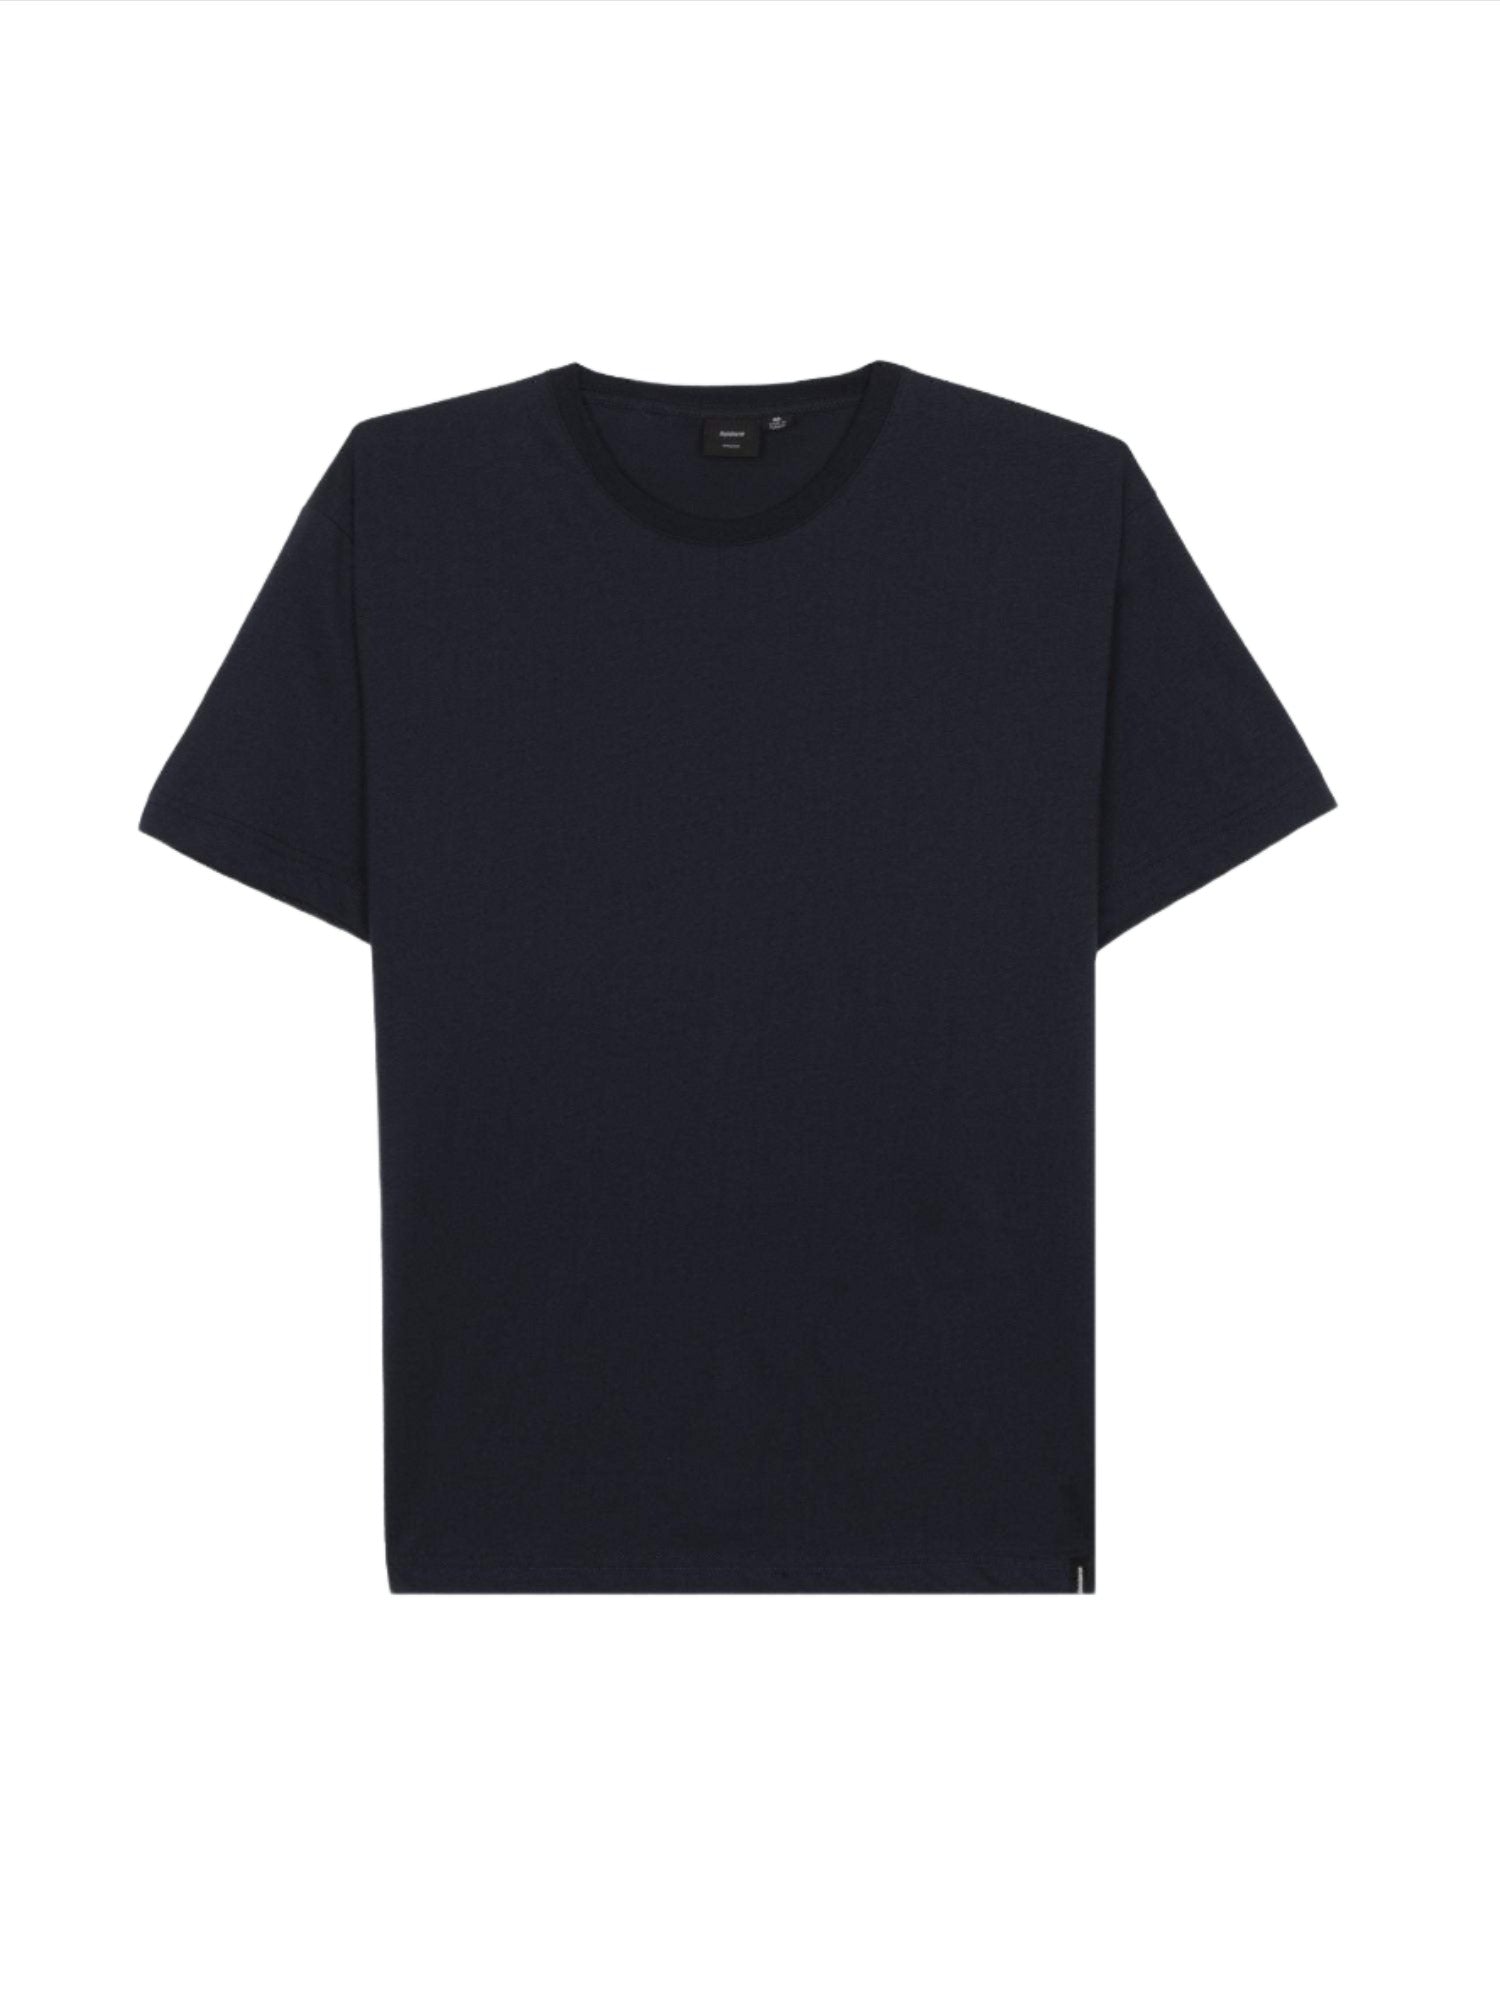 Harlyn SS T-shirt by Finisterre - The Luxury Promotional Gifts Company Limited